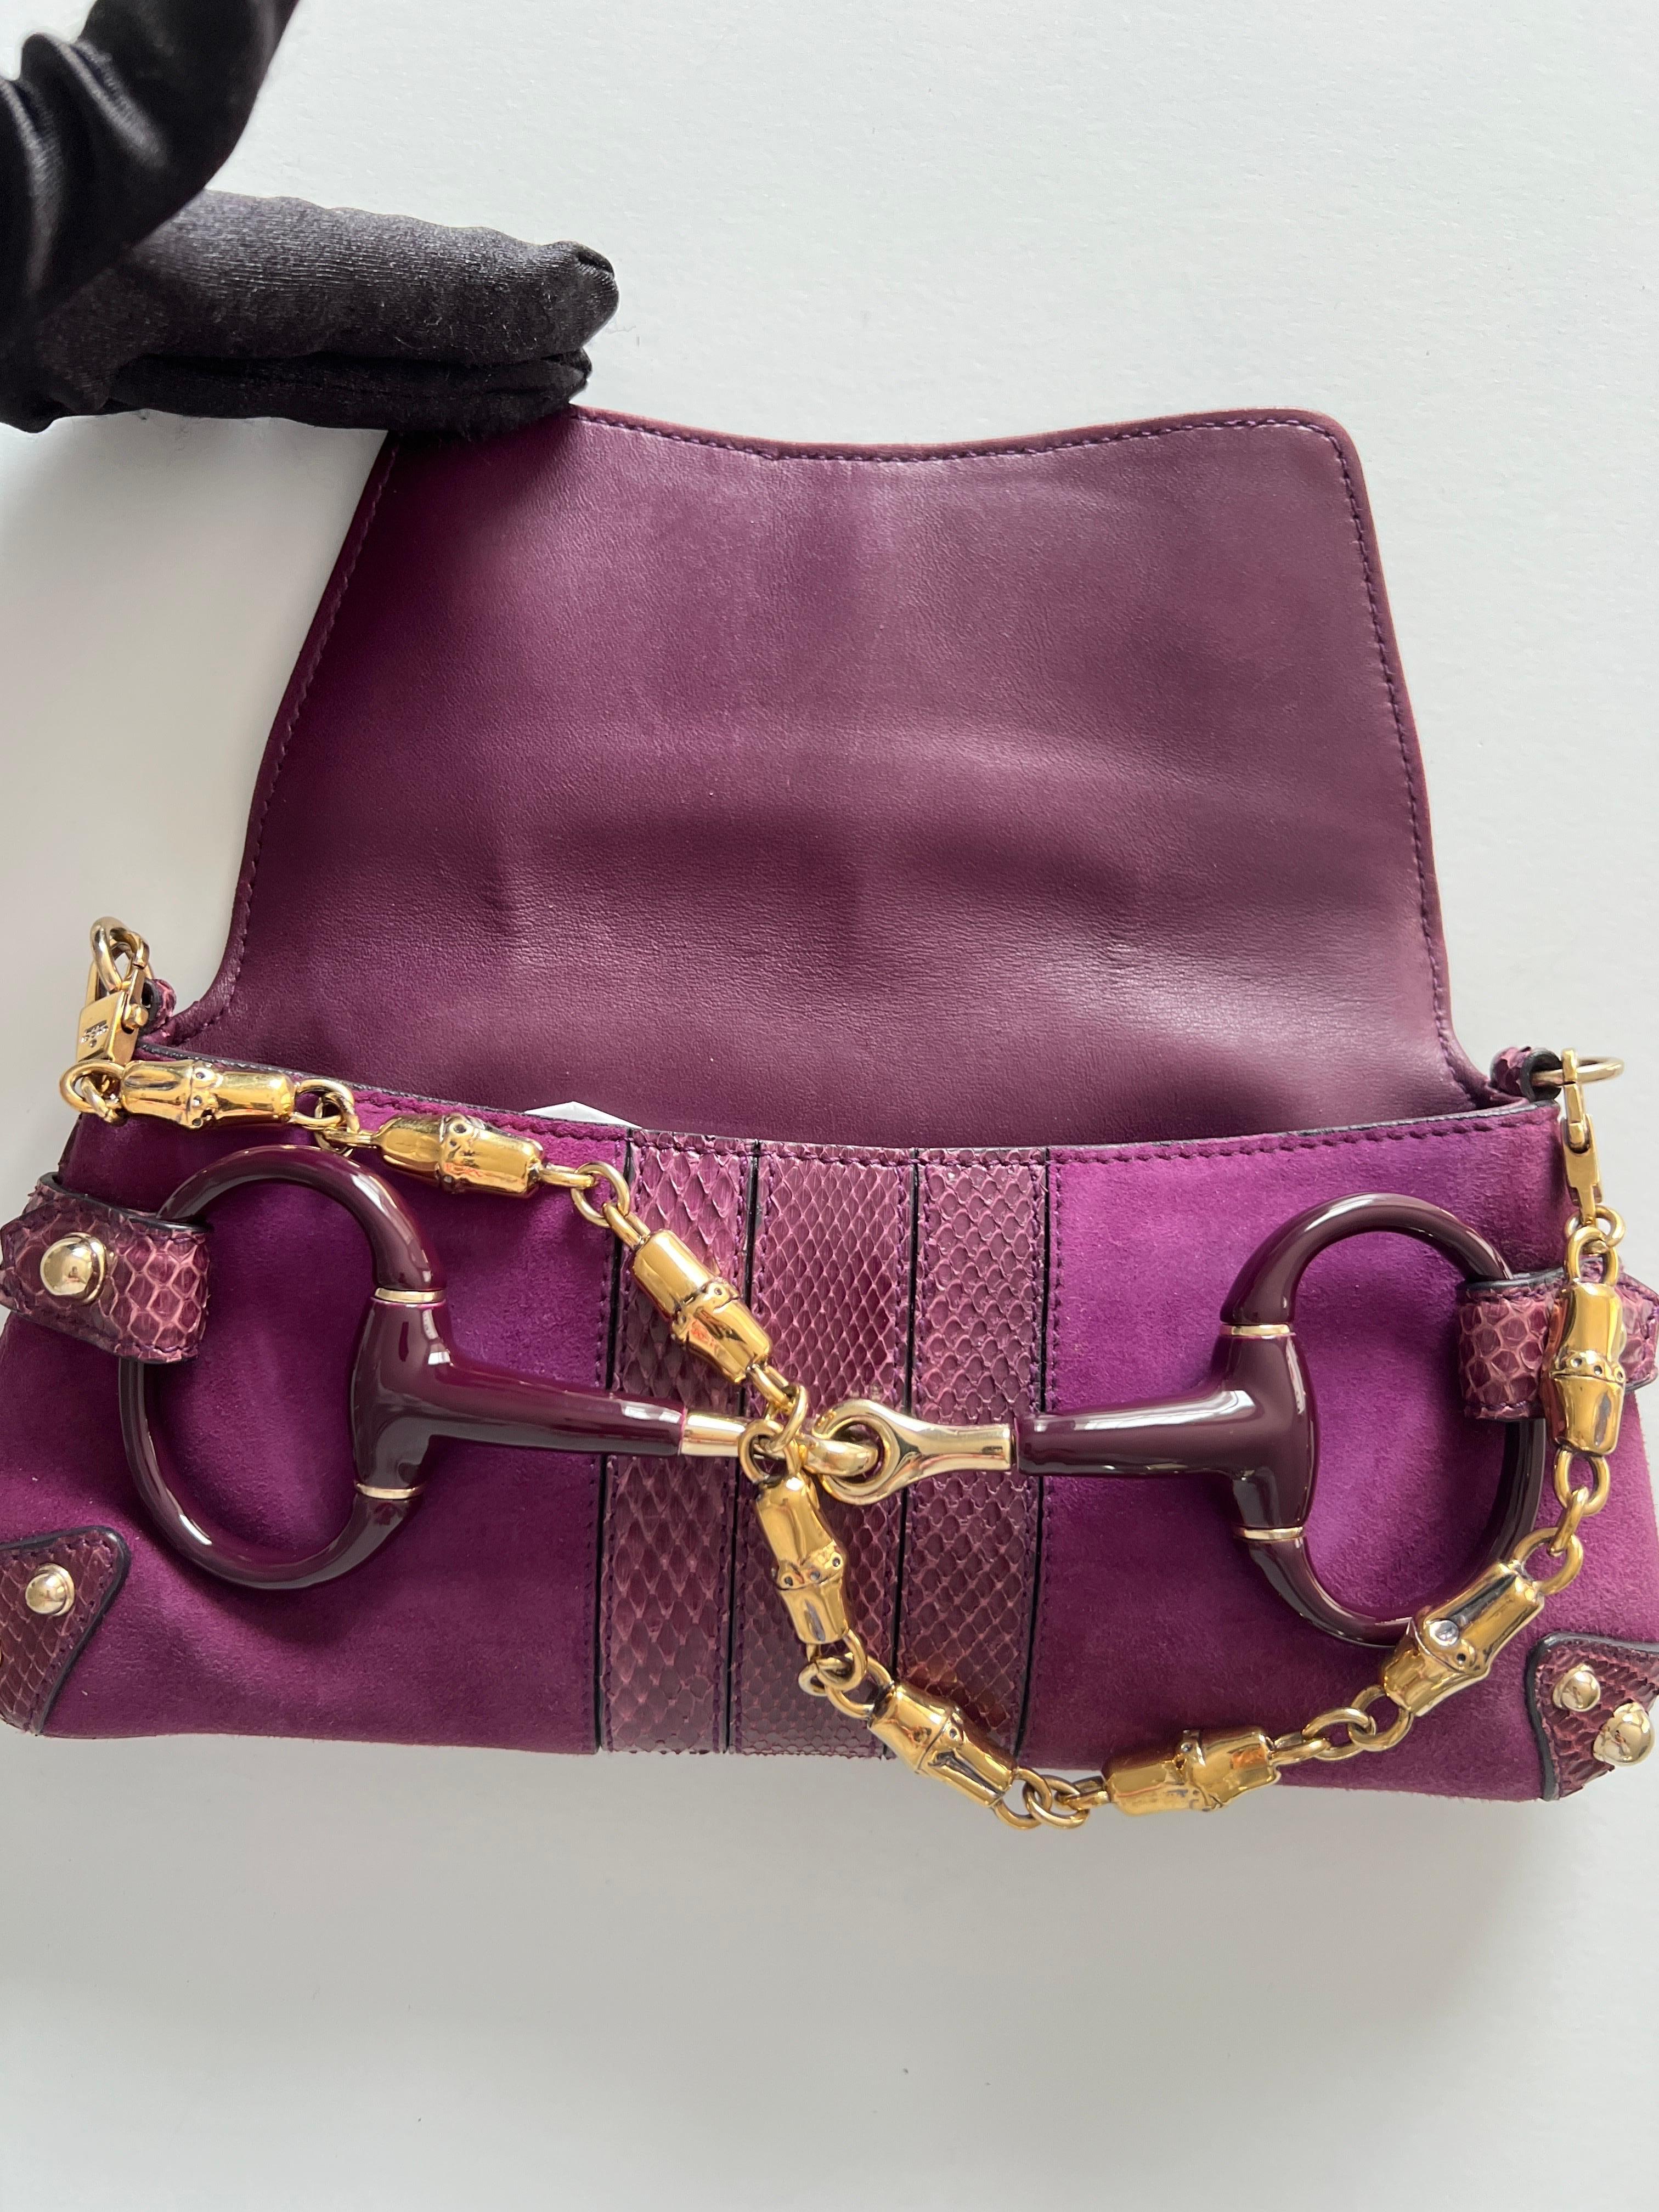 GUCCI Purple Suede And Snakeskin Horsebit Clutch Bag In Good Condition For Sale In Aurora, IL